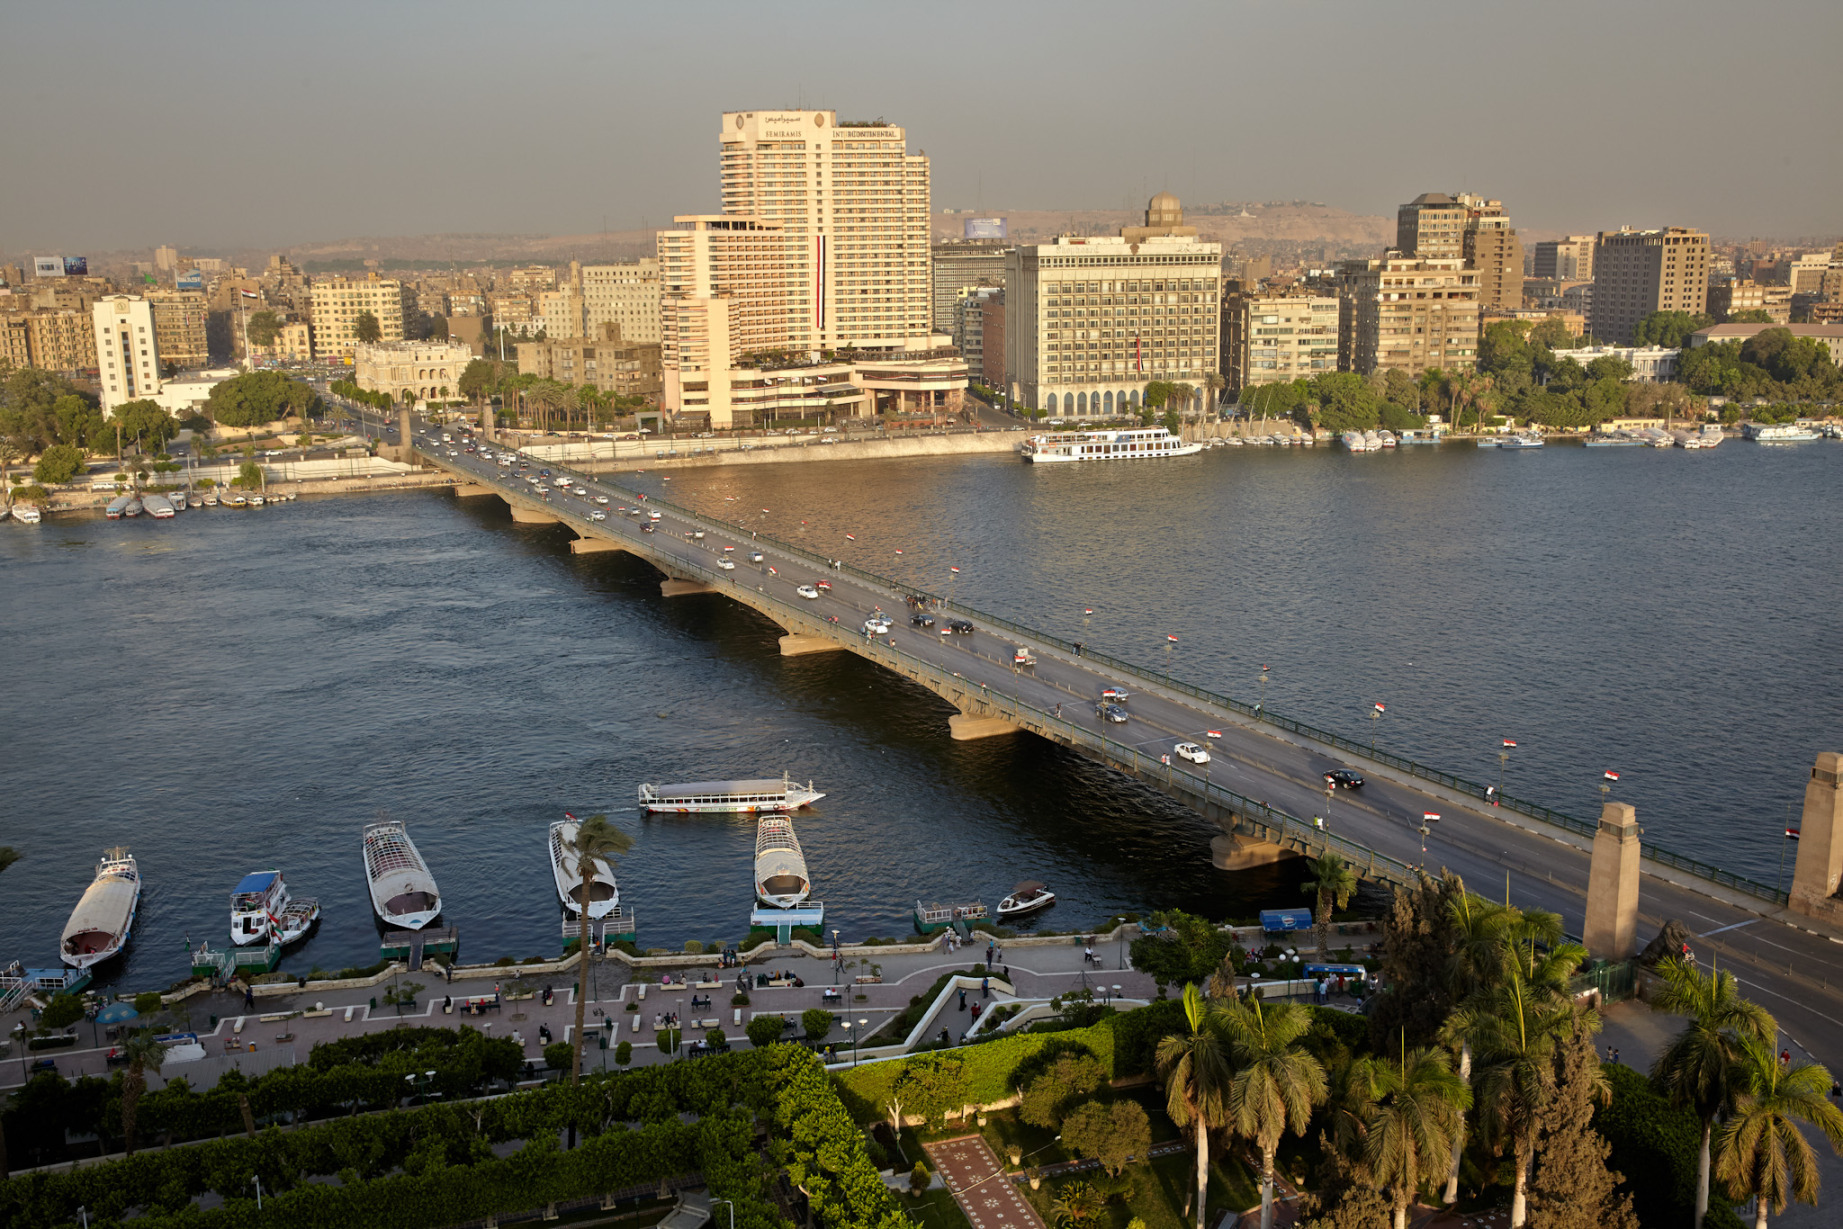 Traffic drives along a bridge spanning the river Nile, in Cairo, Egypt, on Friday, Aug. 7, 2015.